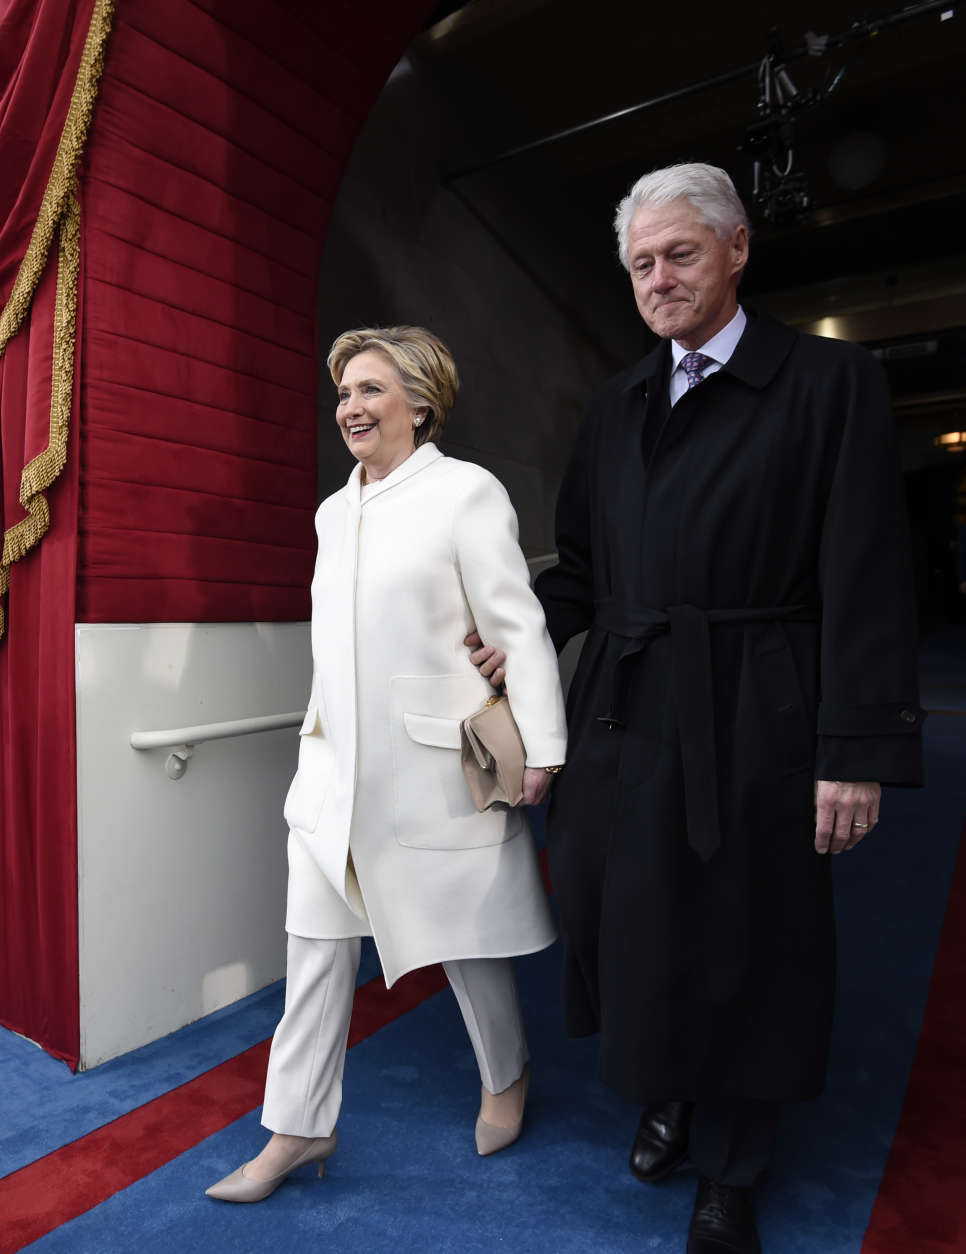 WASHINGTON, DC - JANUARY 20: Former US President Bill Clinton and First Lady Hillary Clinton arrive for the Presidential Inauguration of Donald Trump at the US Capitol on January 20, 2017 in Washington, DC. Donald J. Trump will become the 45th president of the United States today.  (Photo by Saul Loeb - Pool/Getty Images)